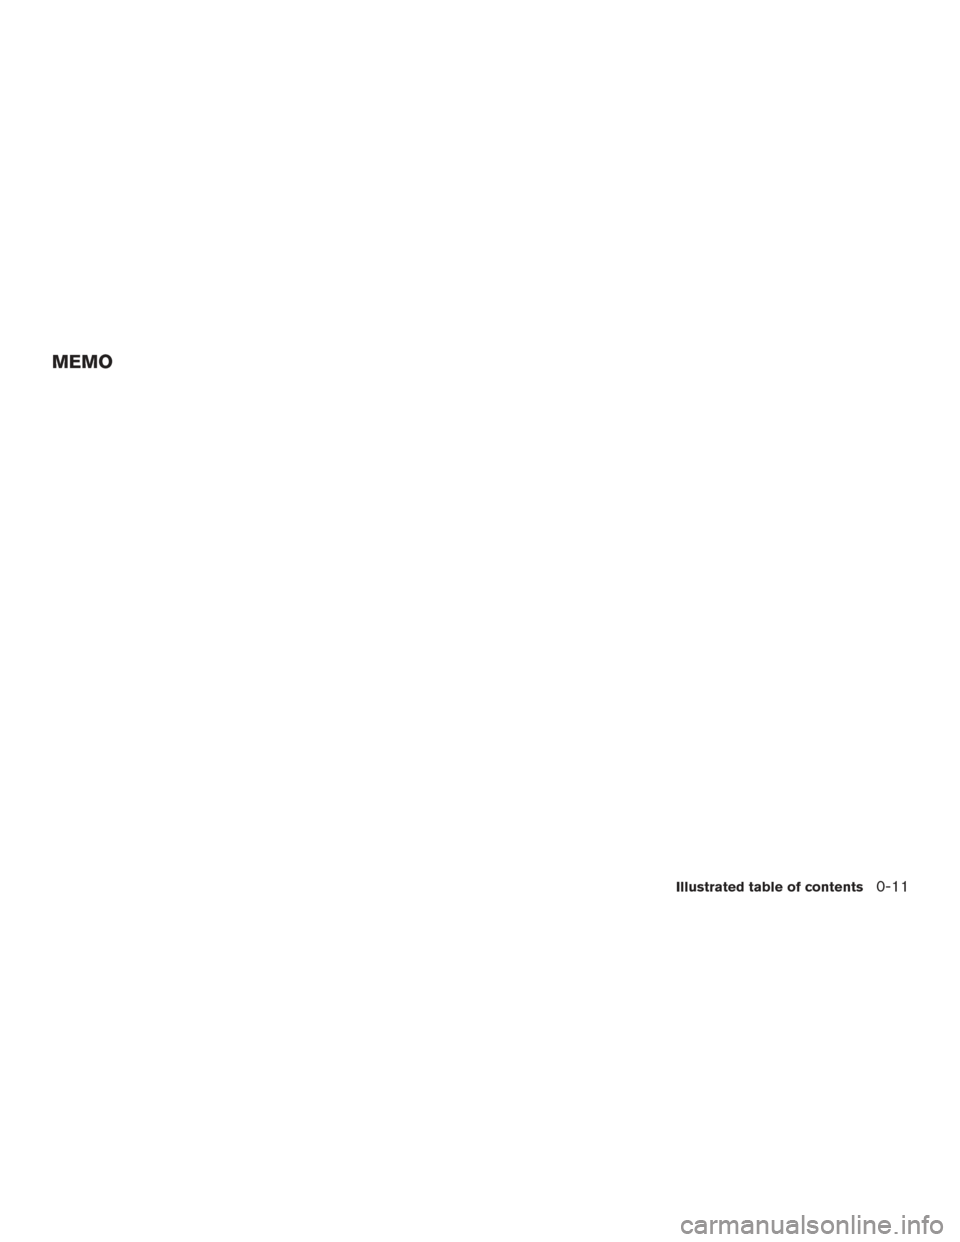 NISSAN TITAN 2015 1.G Owners Manual MEMO
Illustrated table of contents0-11 